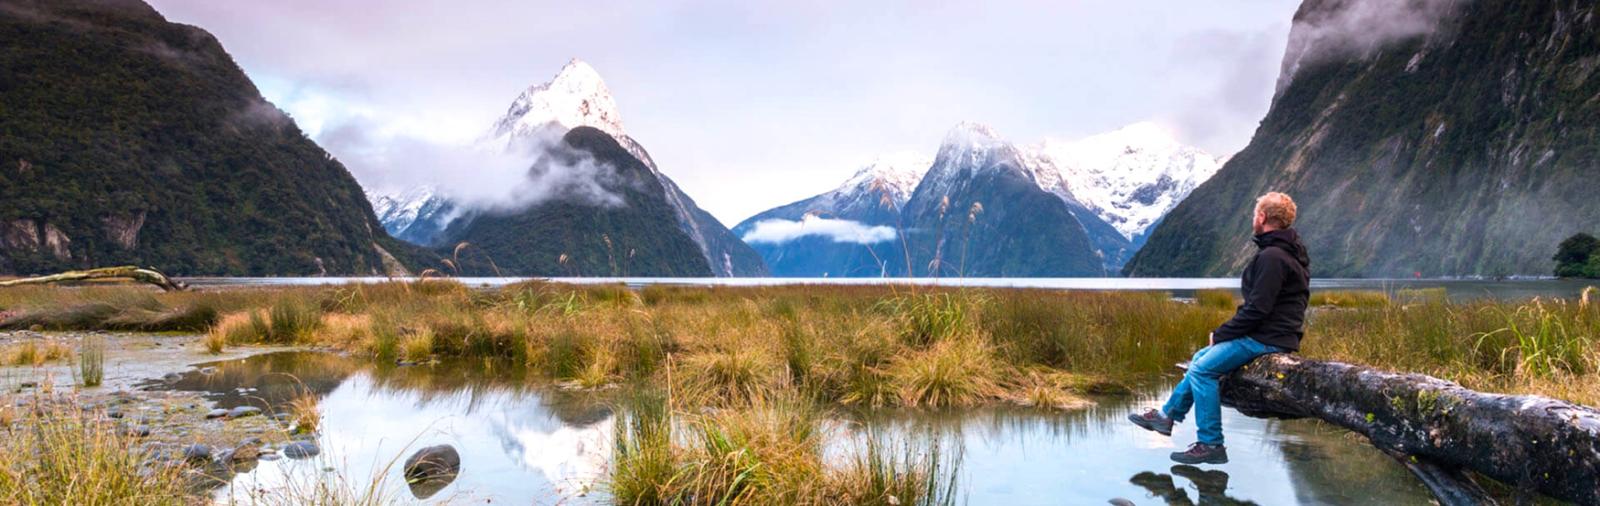 Private Day Hikes Tour - The South Island